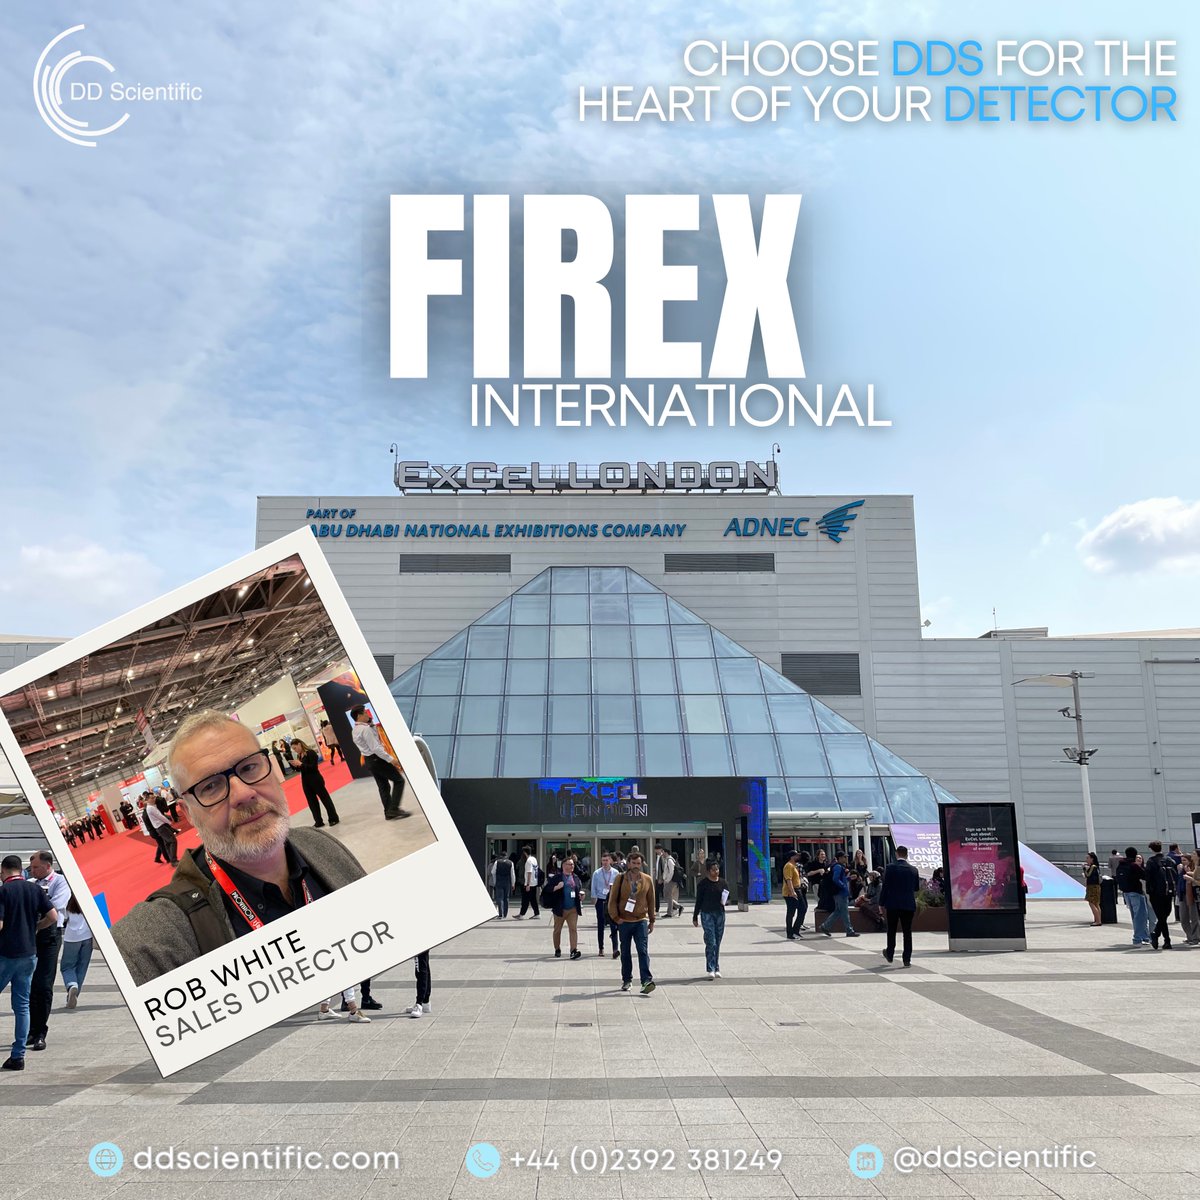 Today is the last day of FIREX International, The team will be walking the expo. Promoting the DDS residential, fire detection and burner safety range. 

#firedetection #residential #burnersafety #gasdetection #gassensor #carbonmonoxide #firexinternational #safety